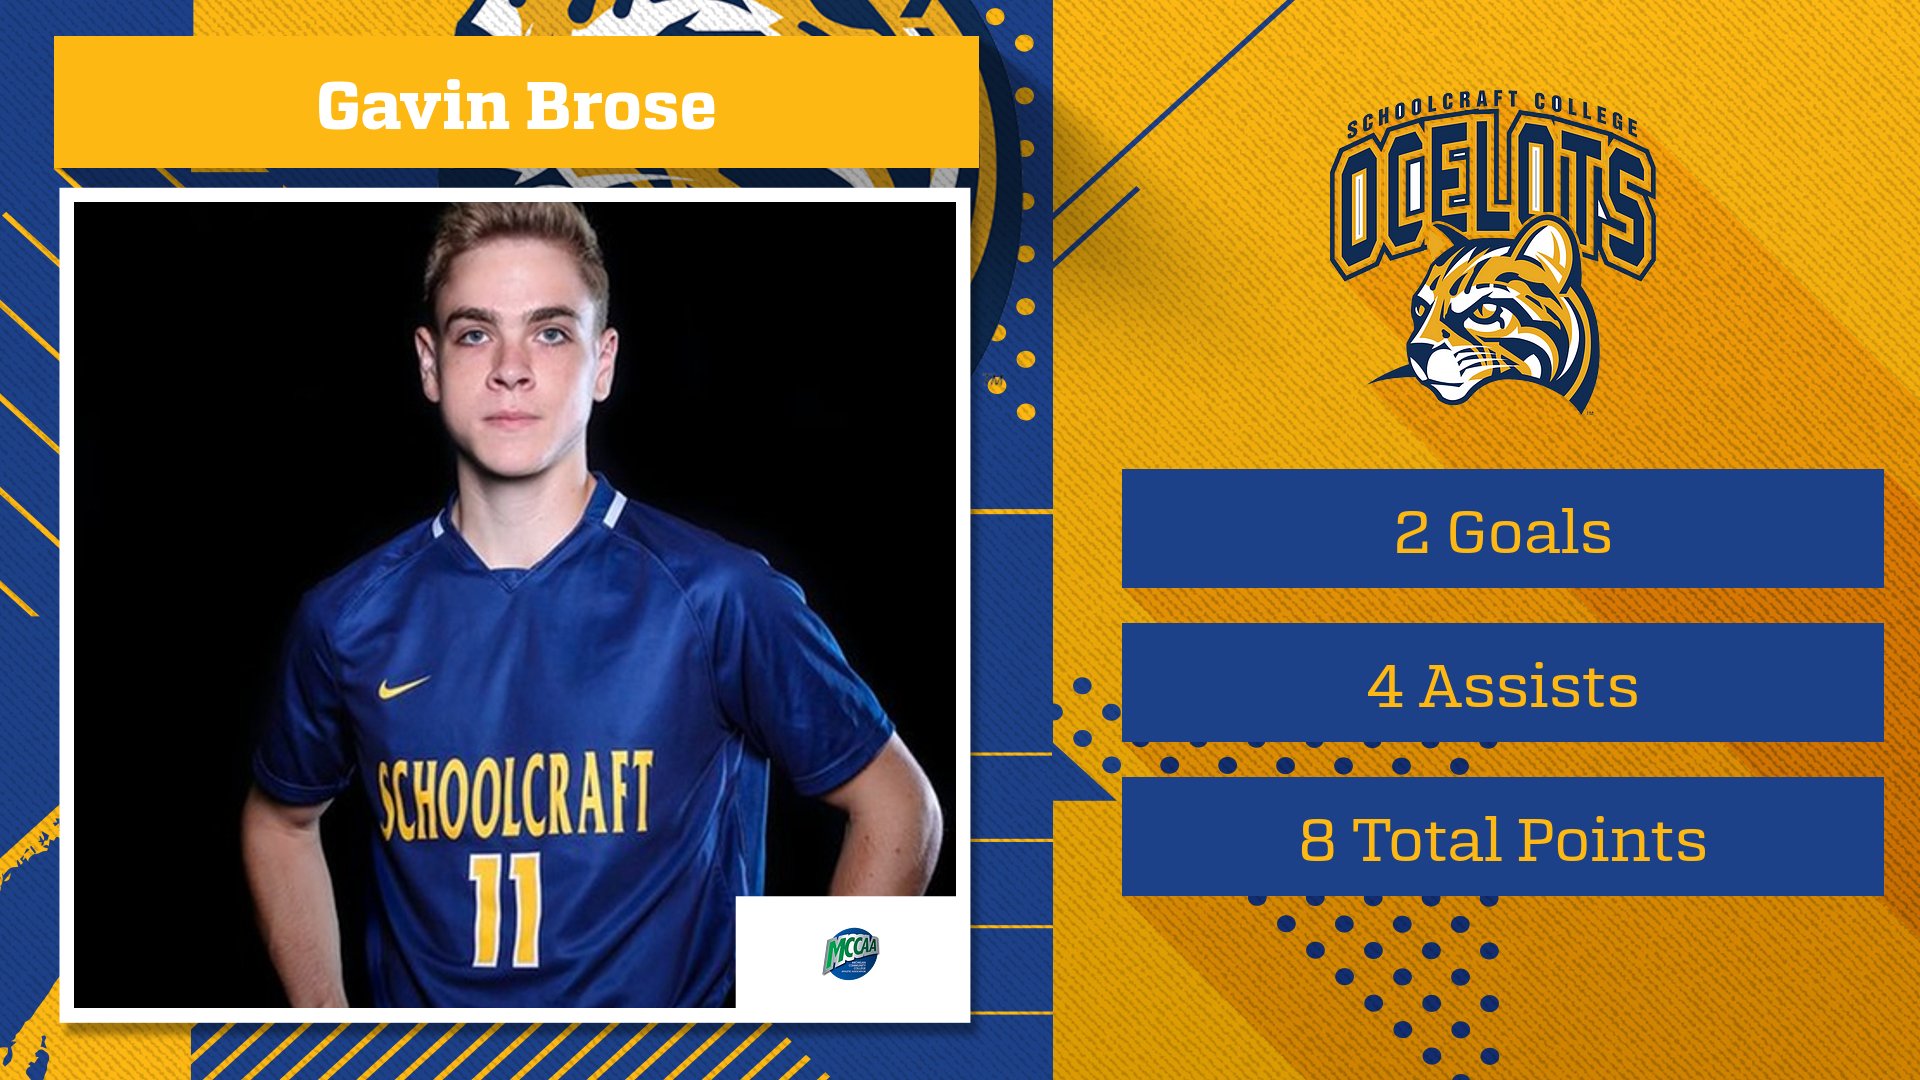 Gavin Brose, Schoolcraft College, is the MCCAA Men's Soccer Player of the Week